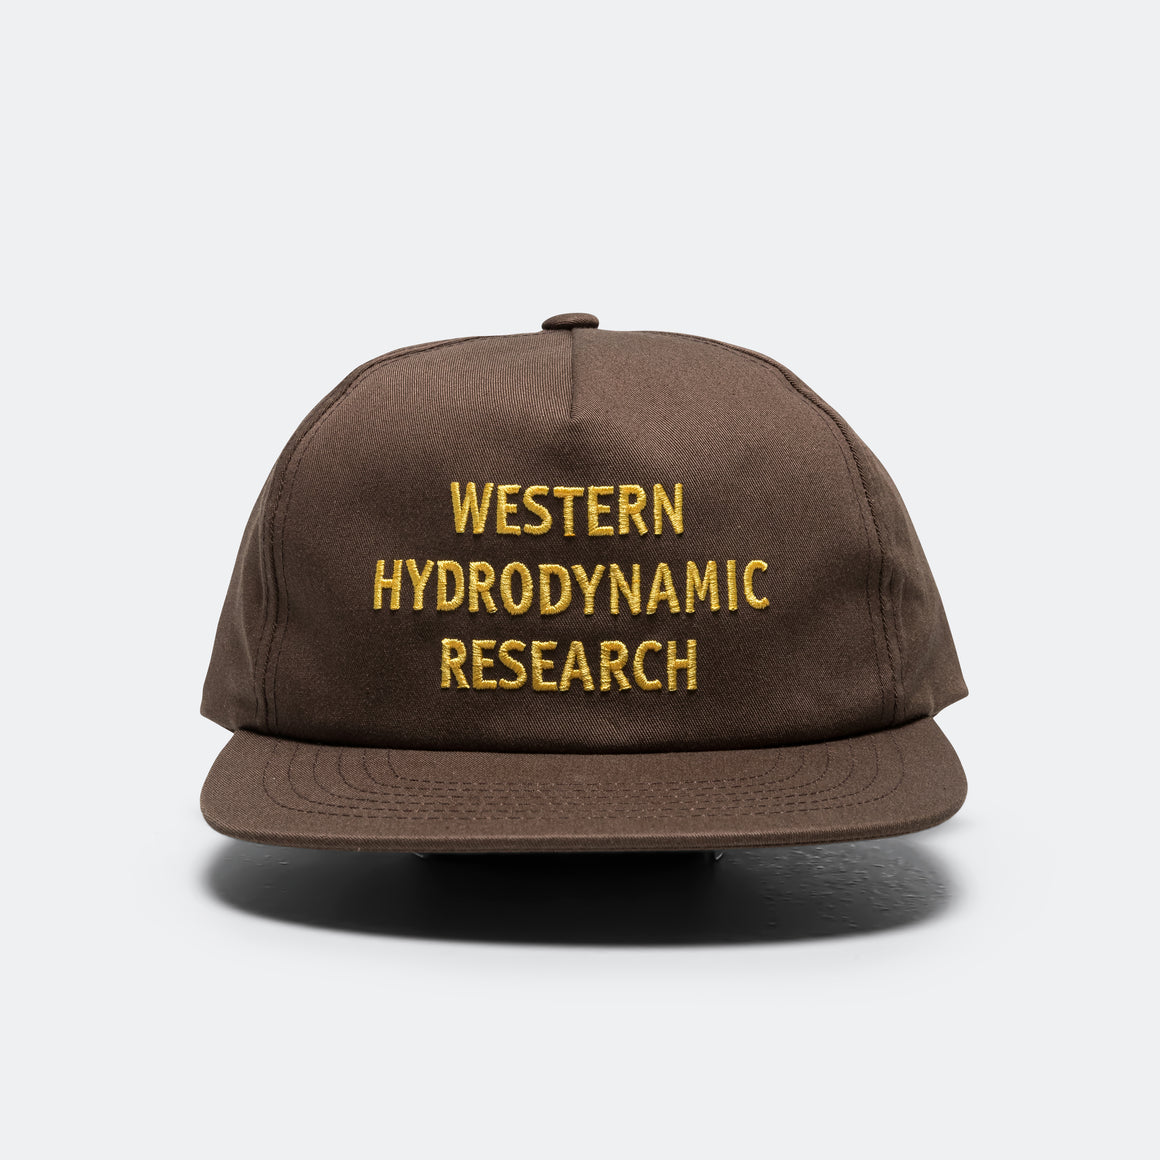 Promotional Hat - Brown